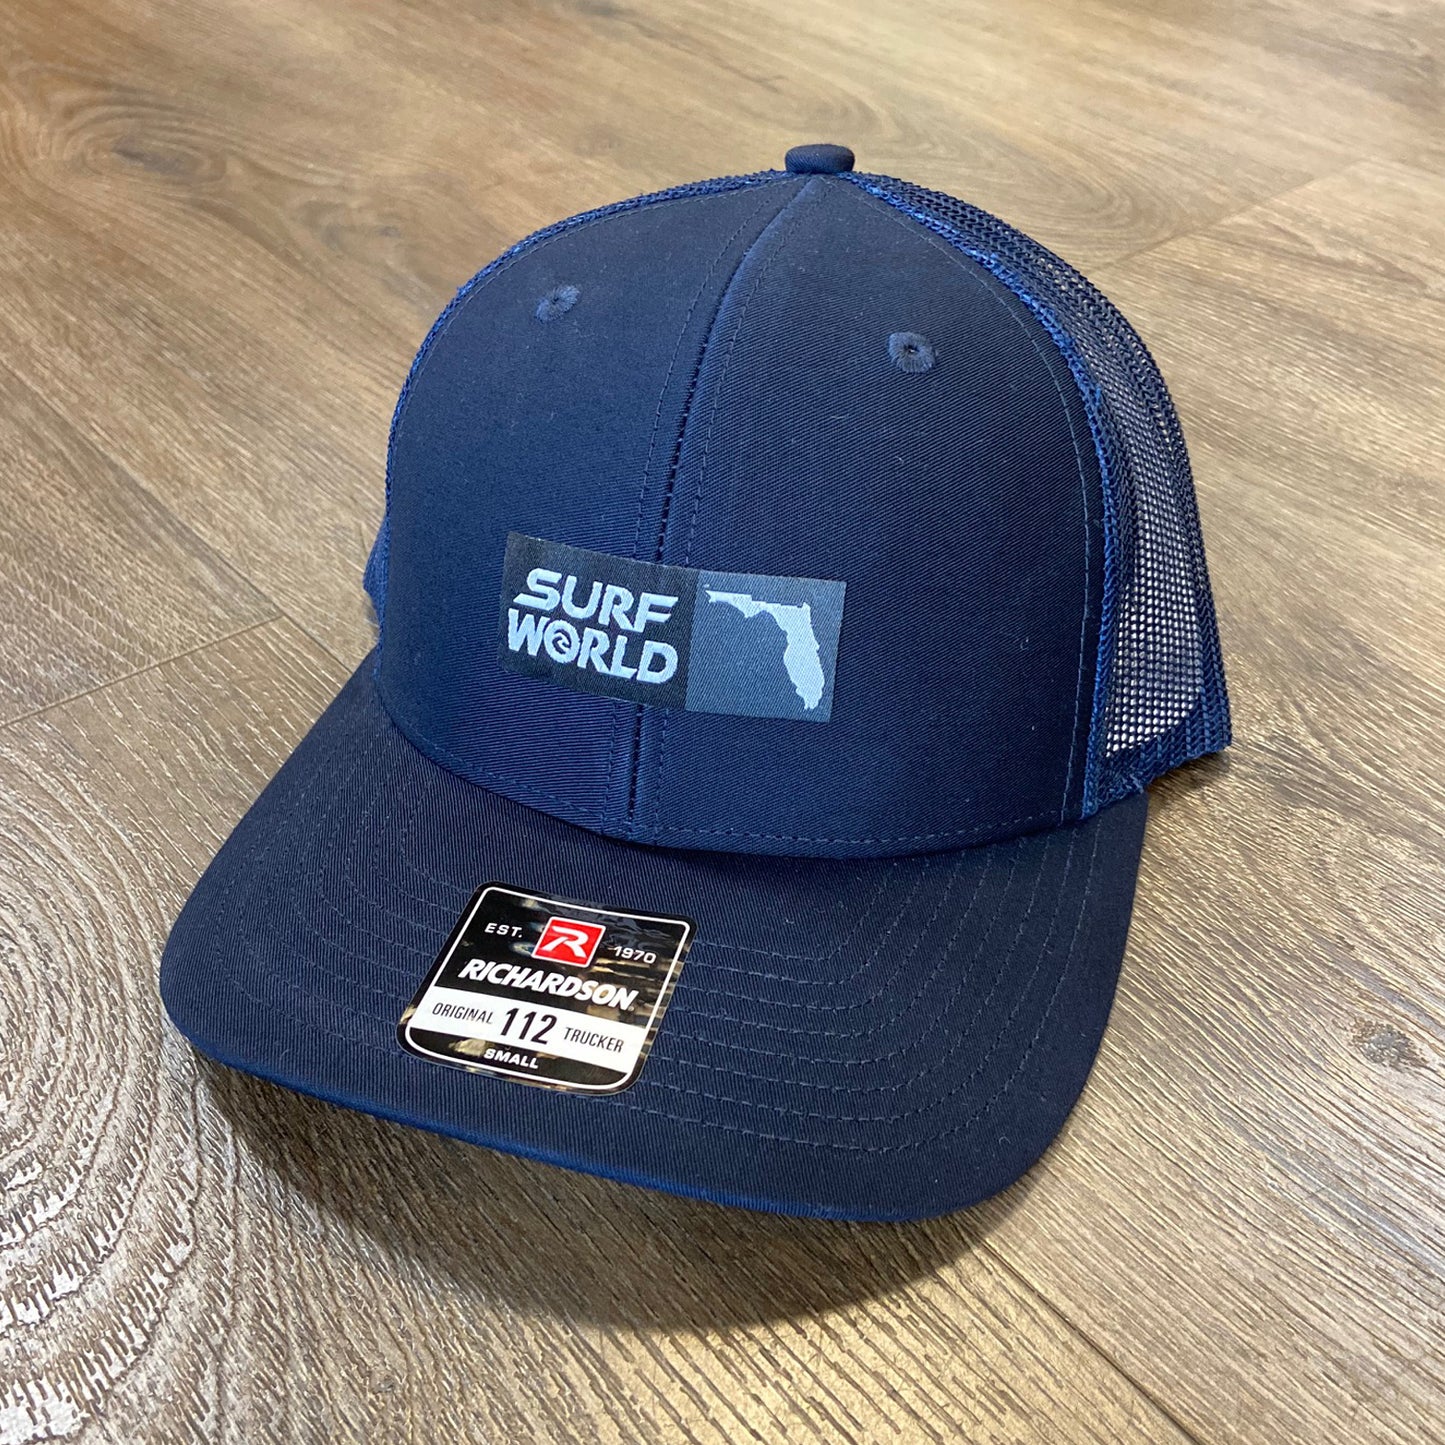 Surf World Florida Patch Trucker Hat Hats Solid Navy